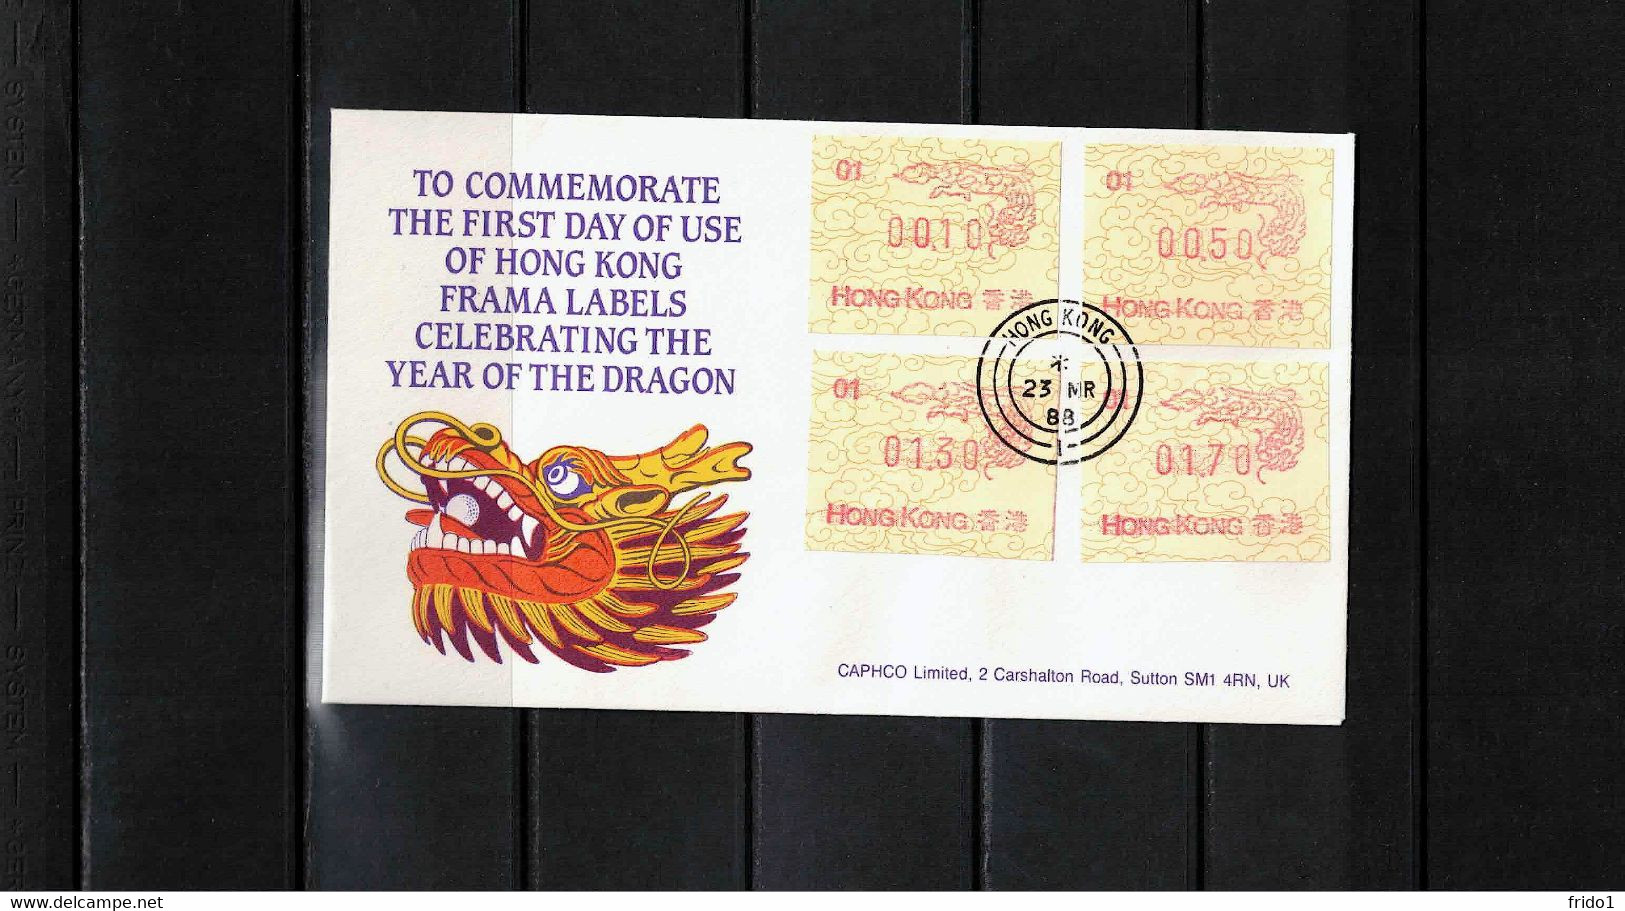 Hong Kong 1988 ATM Frama Labels NR.01 - Year Of The Dragon FDC - FDC